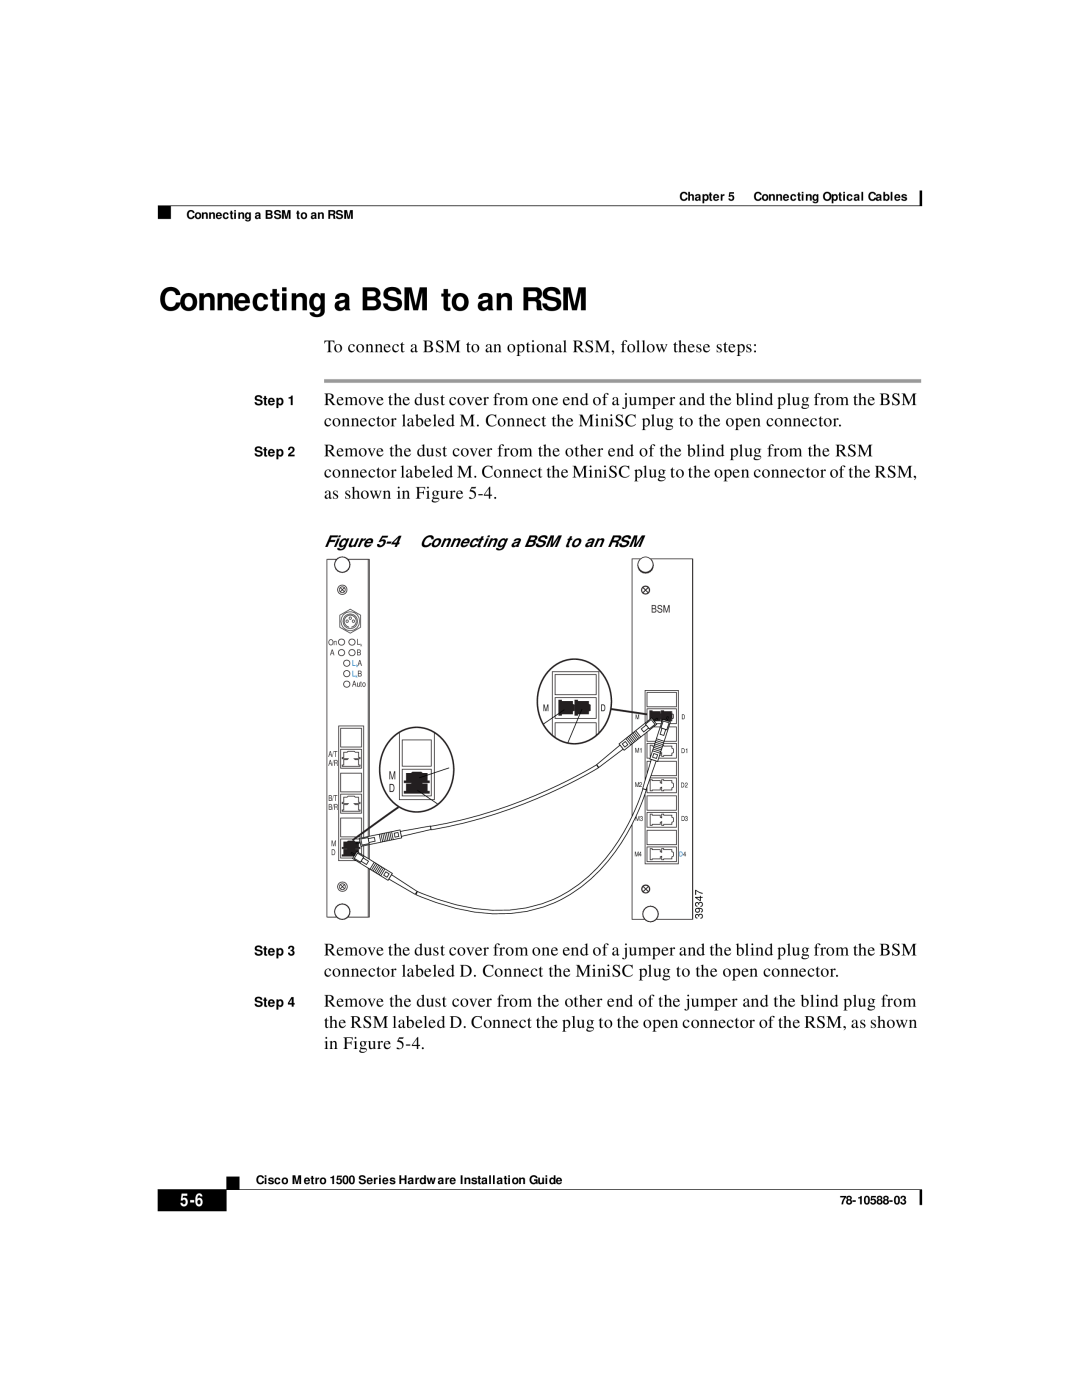 Cisco Systems 1500 manual Connecting a BSM to an RSM 